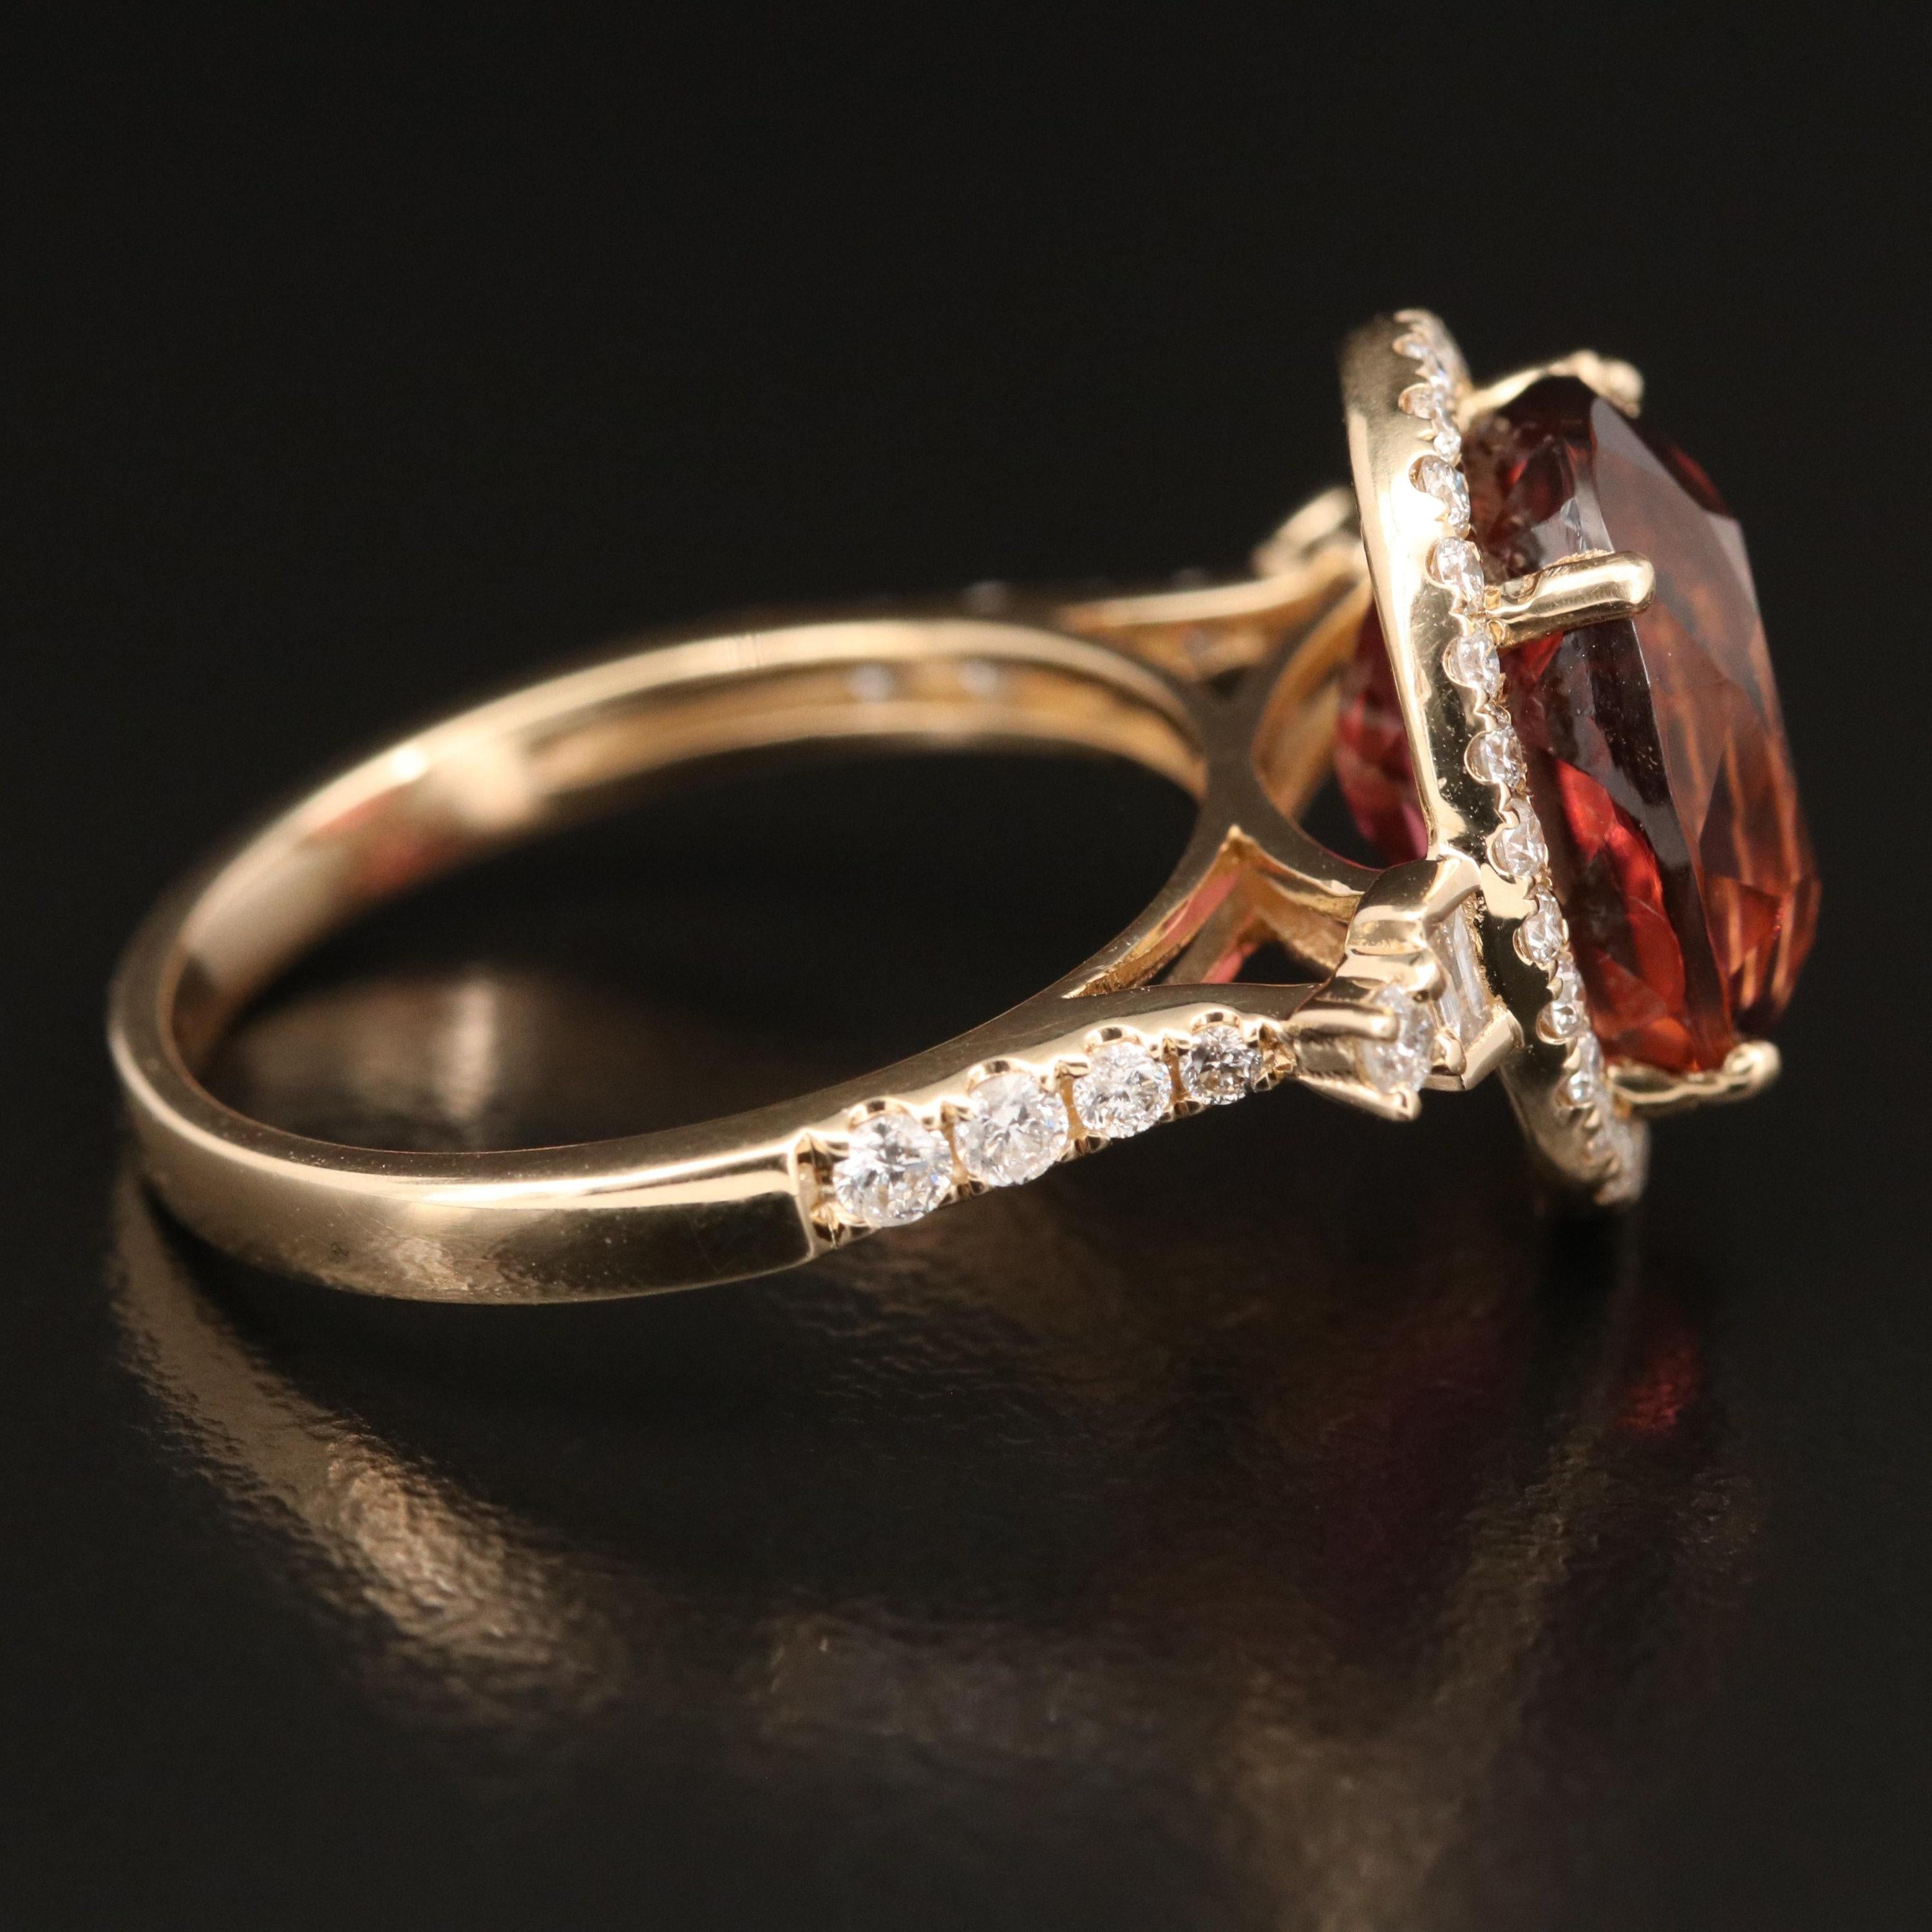 For Sale:  6.3 Carat Oval Cut Rubellite Tourmaline Bridal Promise Ring Halo Tourmaline Ring 3